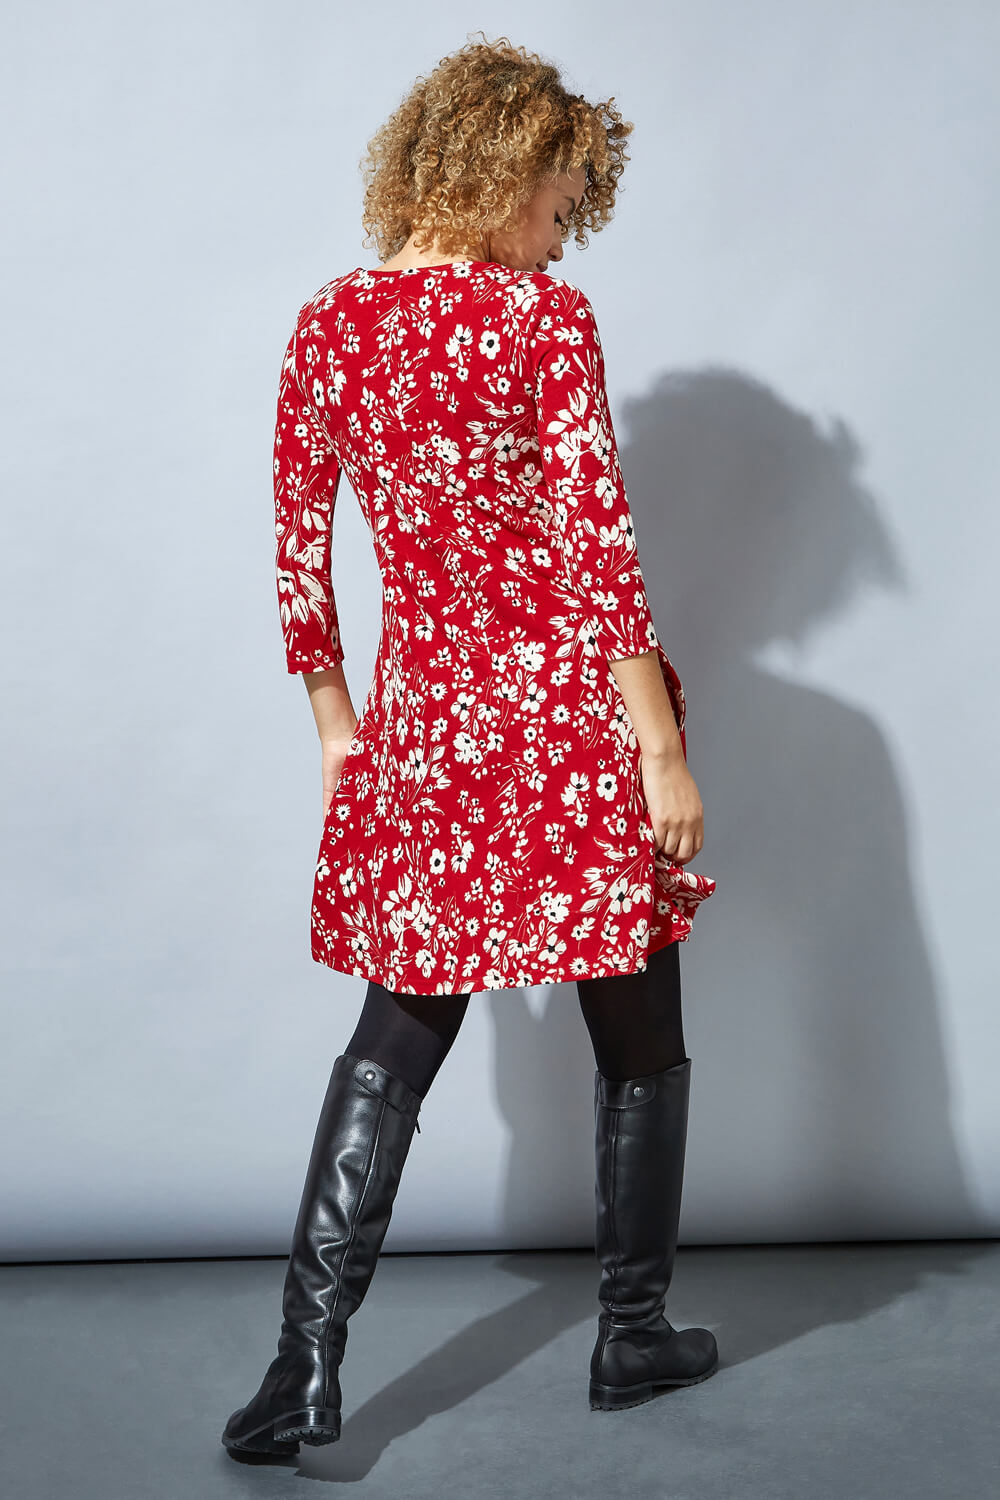 Red Floral Print Swing Dress, Image 3 of 4